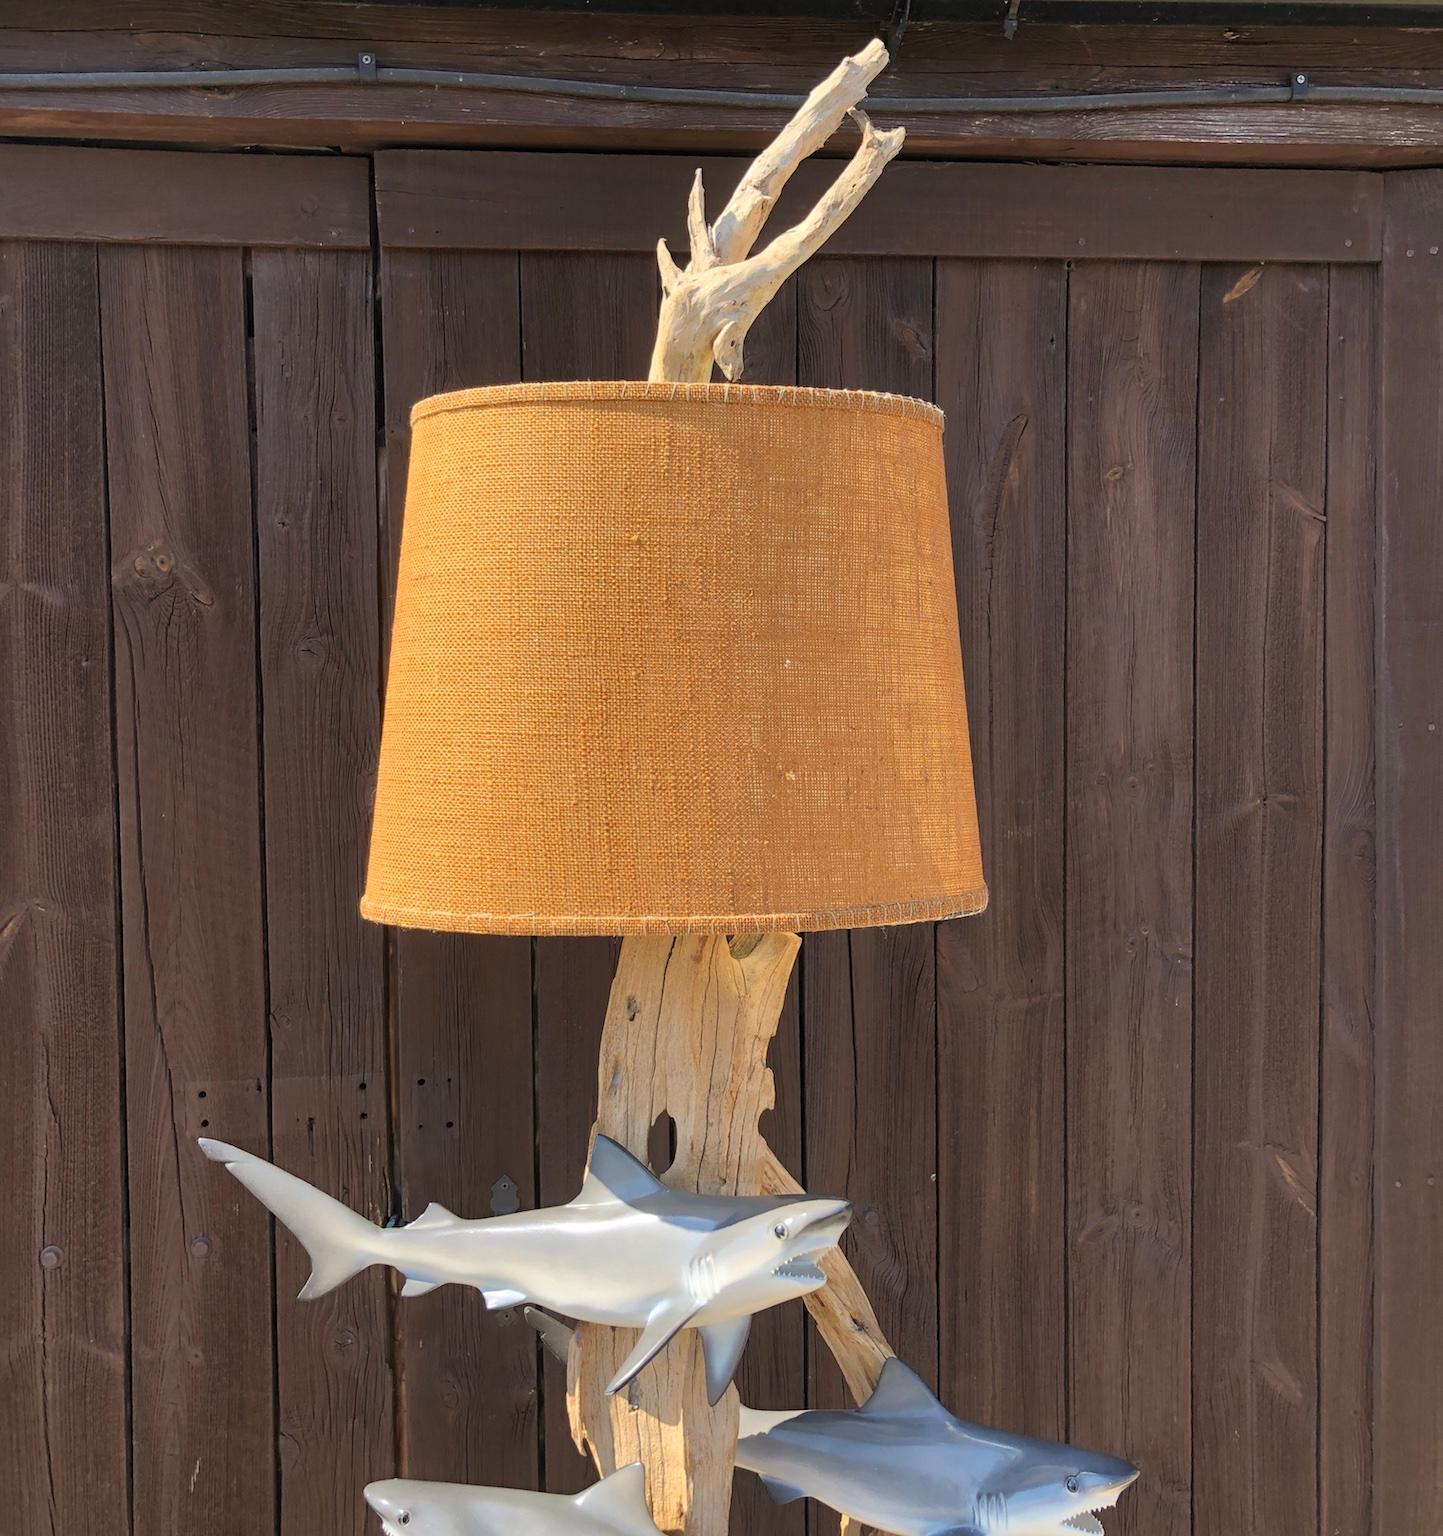 Mid-Century Modern Mid Century Floor Standing Lamp with Sharks, 1960s USA owned by John Enwistle For Sale